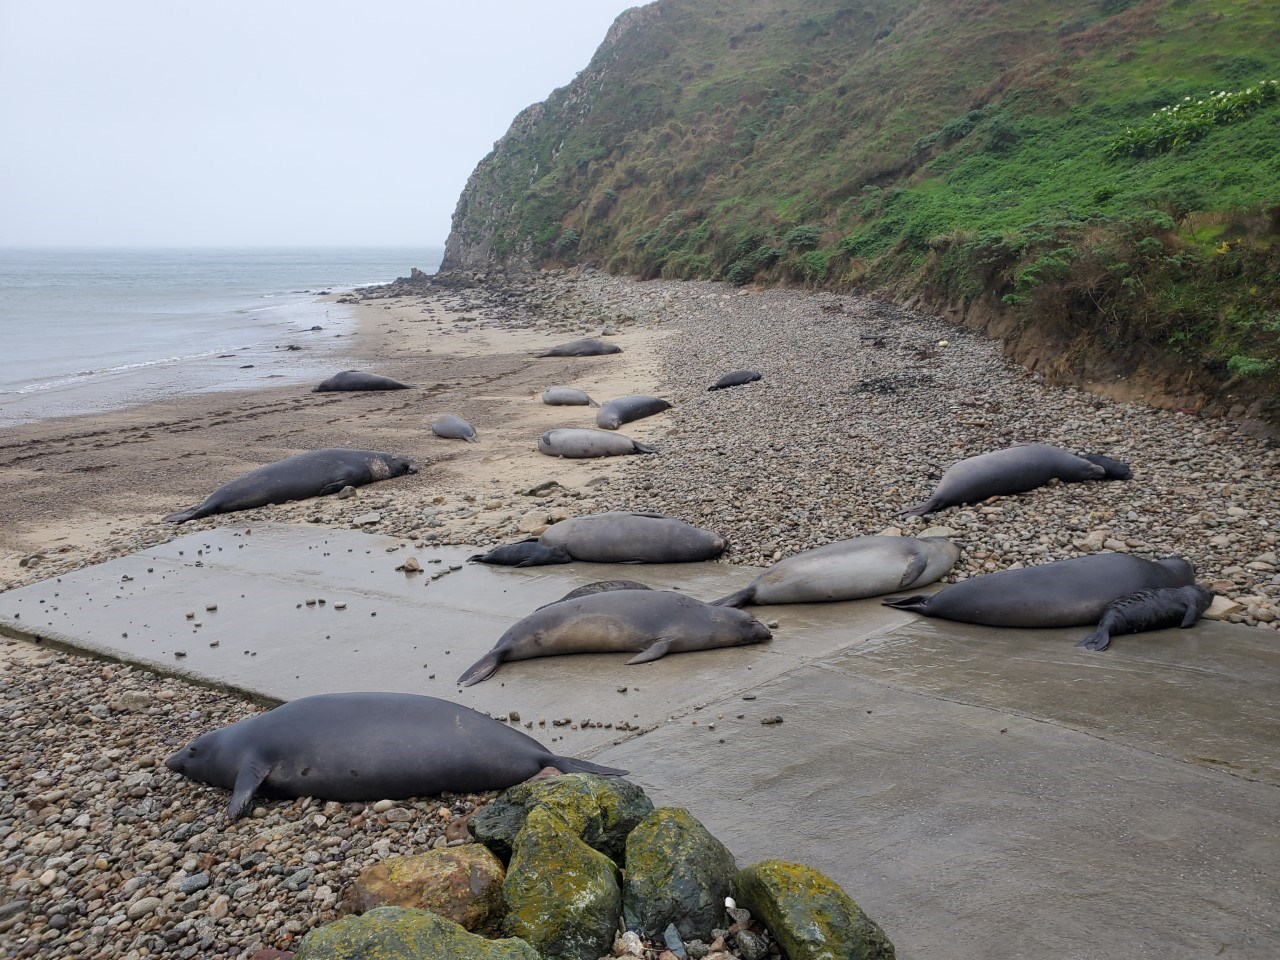 Several elephant seals of varying sizes lay amongst the sand and rock of a beachy cove on a gray day.